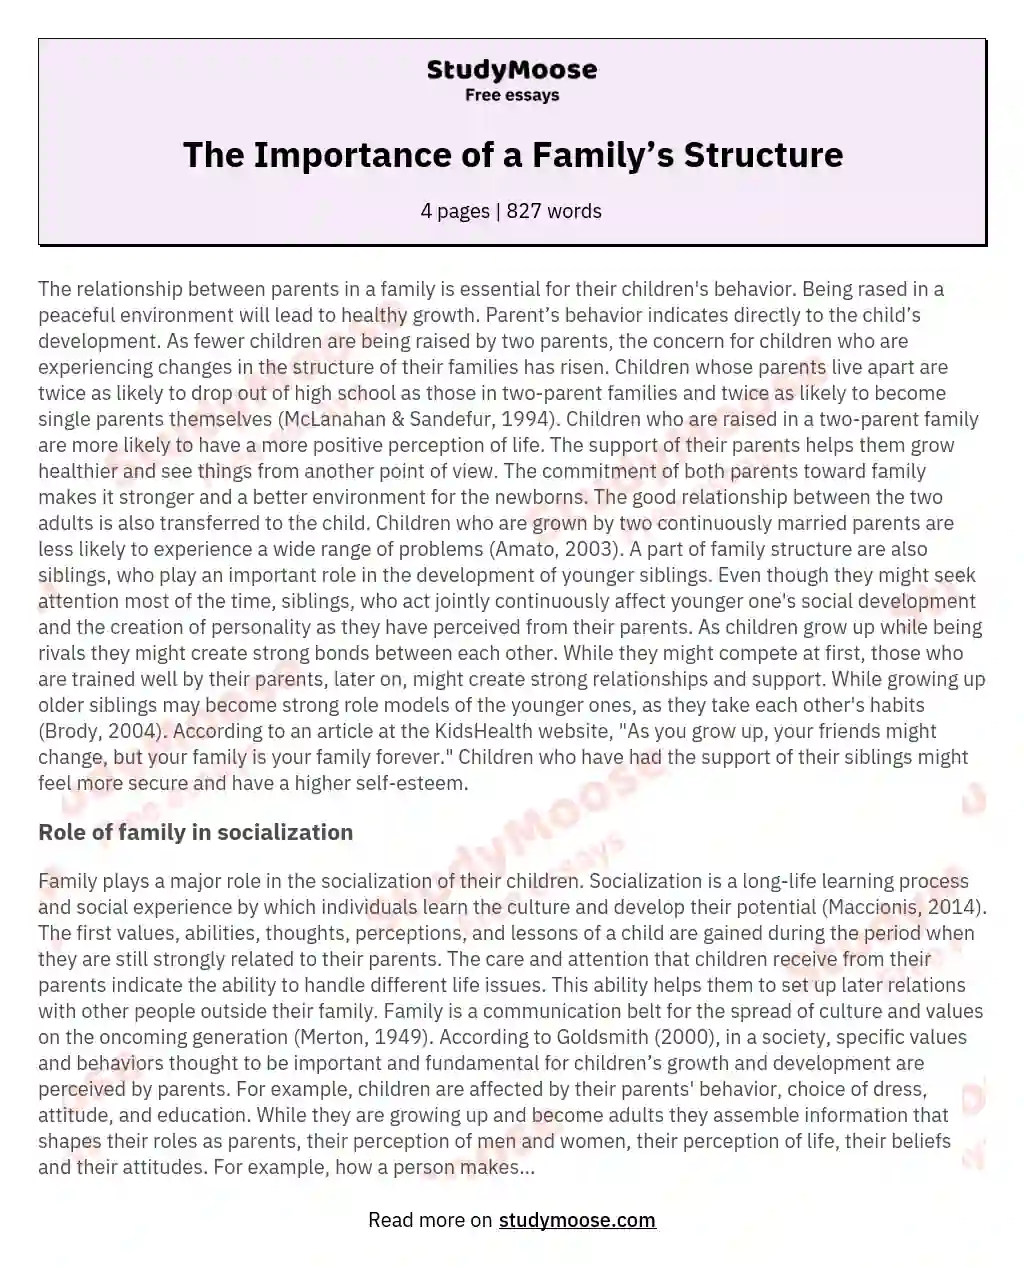 The Importance of a Family’s Structure